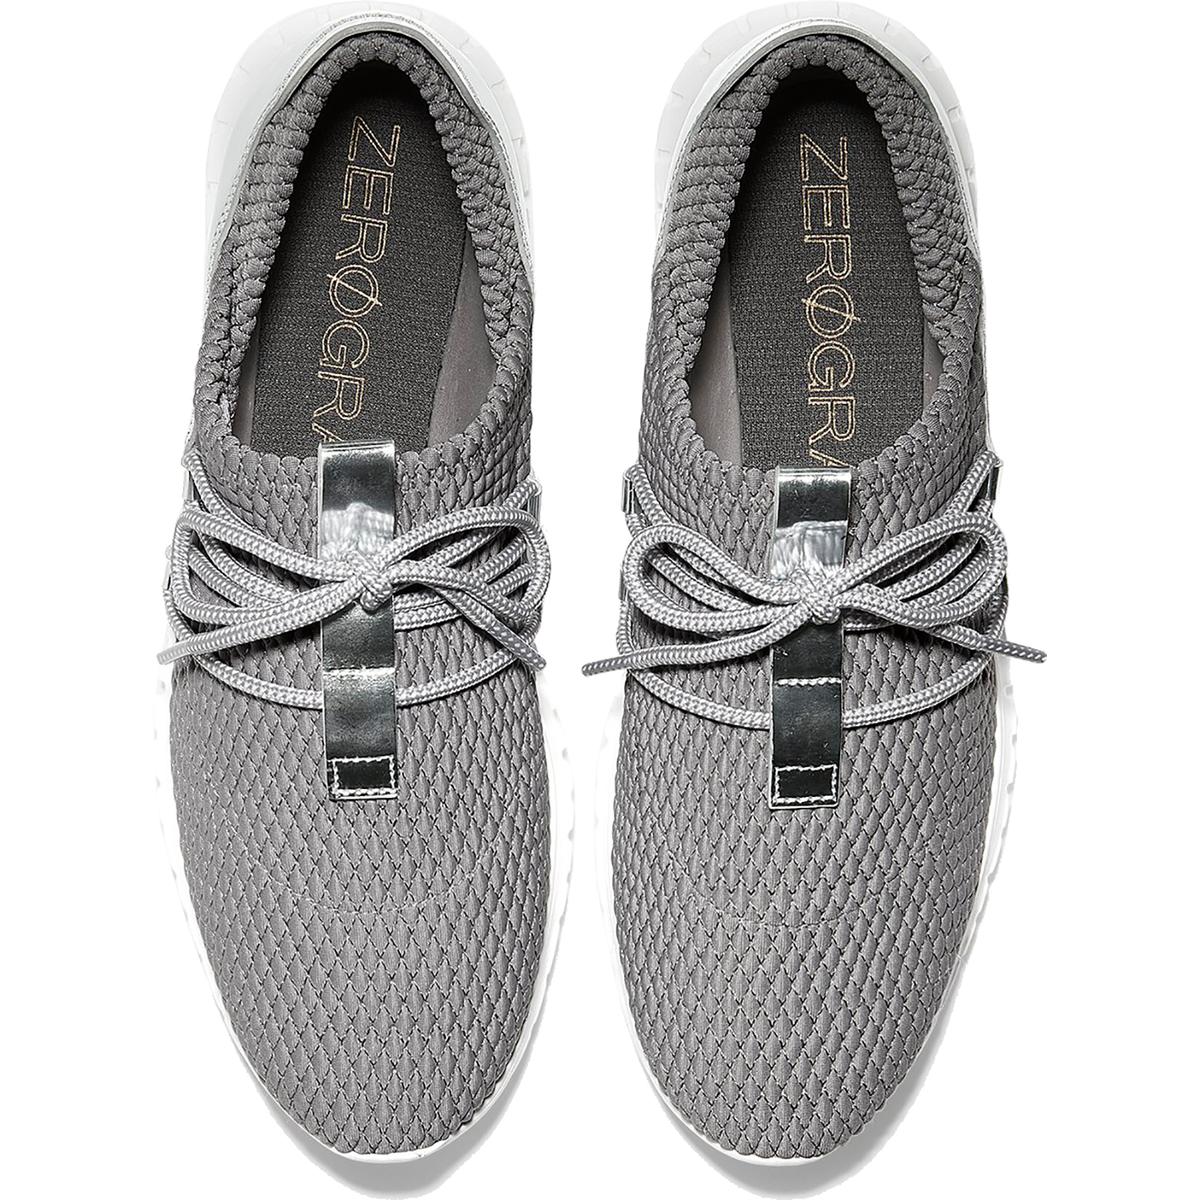 Cole Haan Womens ZEROGRAND Gray Quilted Sneakers Shoes 9 Medium (B,M ...